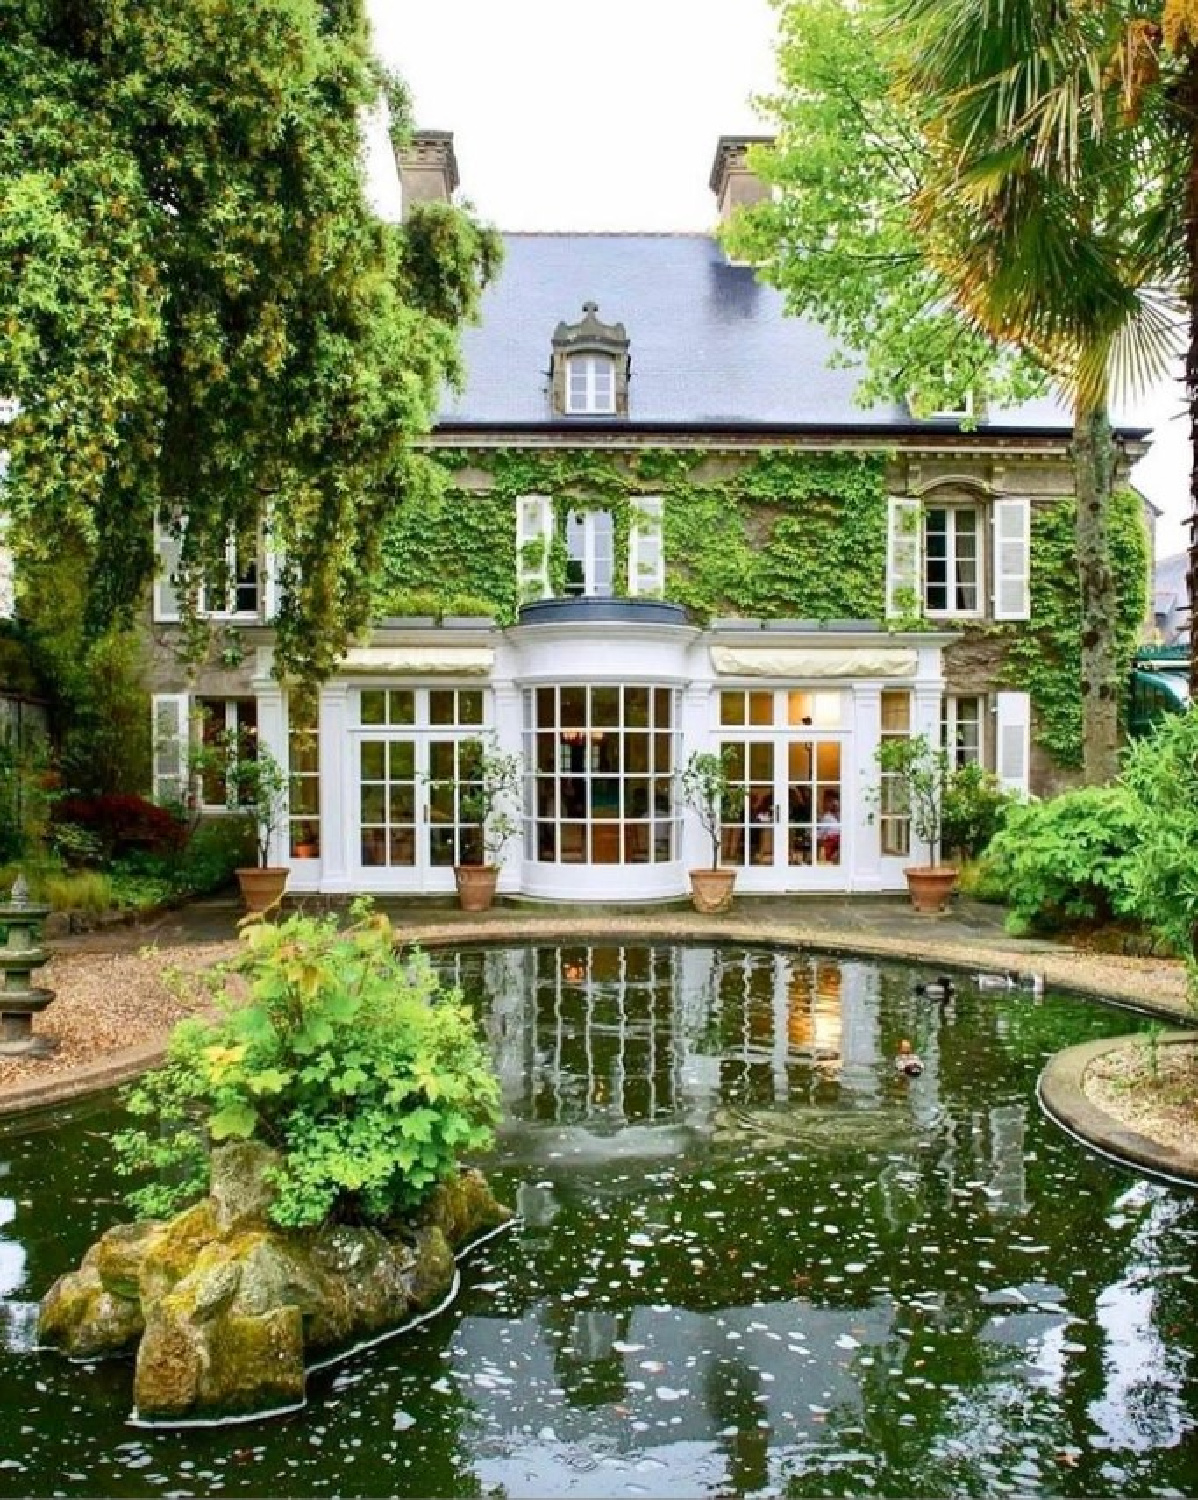 Ivy covered traditional style house with lush garden - @chateauricheux. #facadelovers #ivycovered #timelesshome